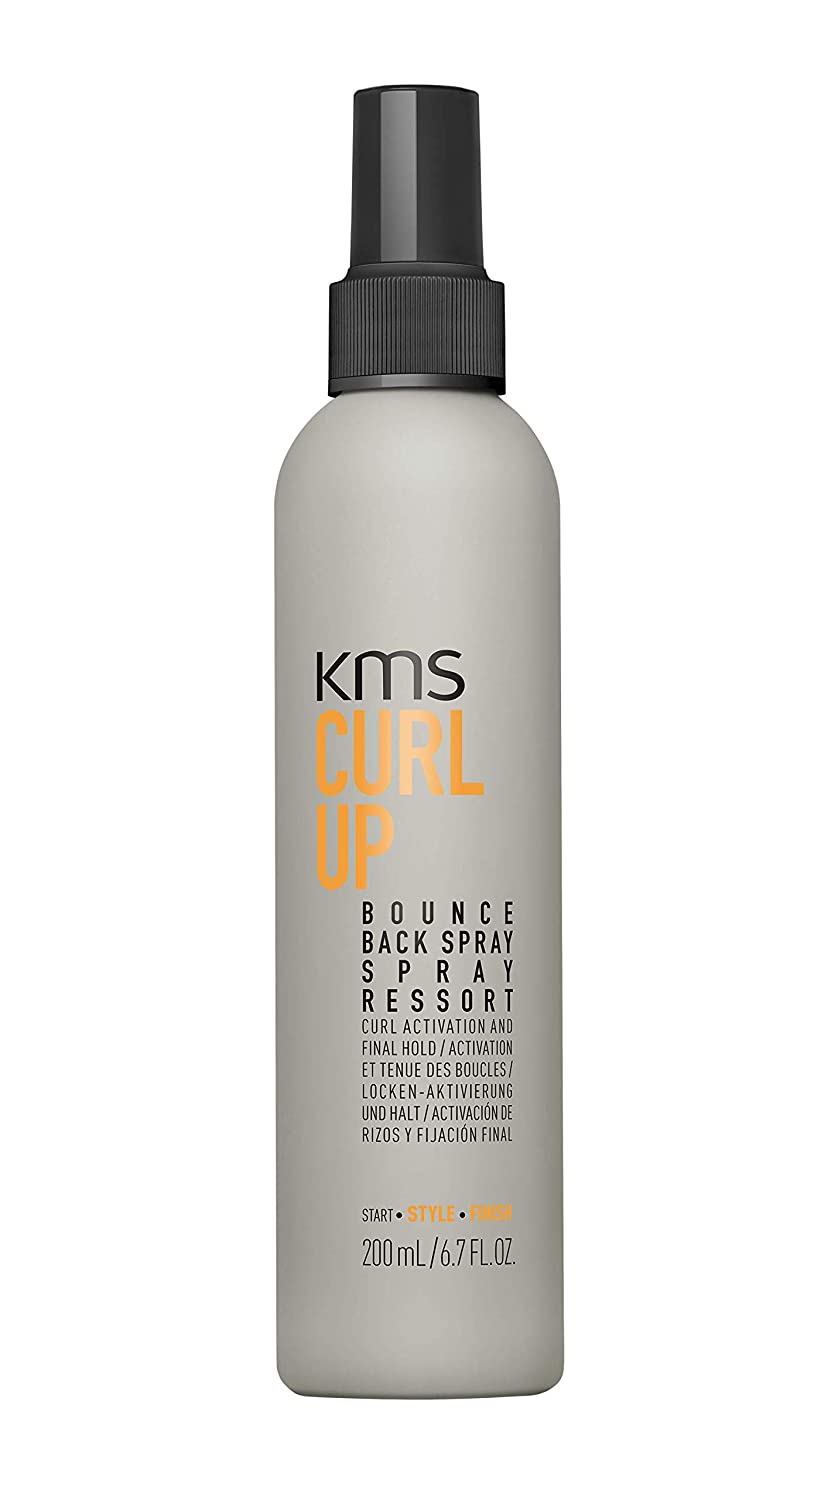 KMS Curl Up Bounce Back Spray